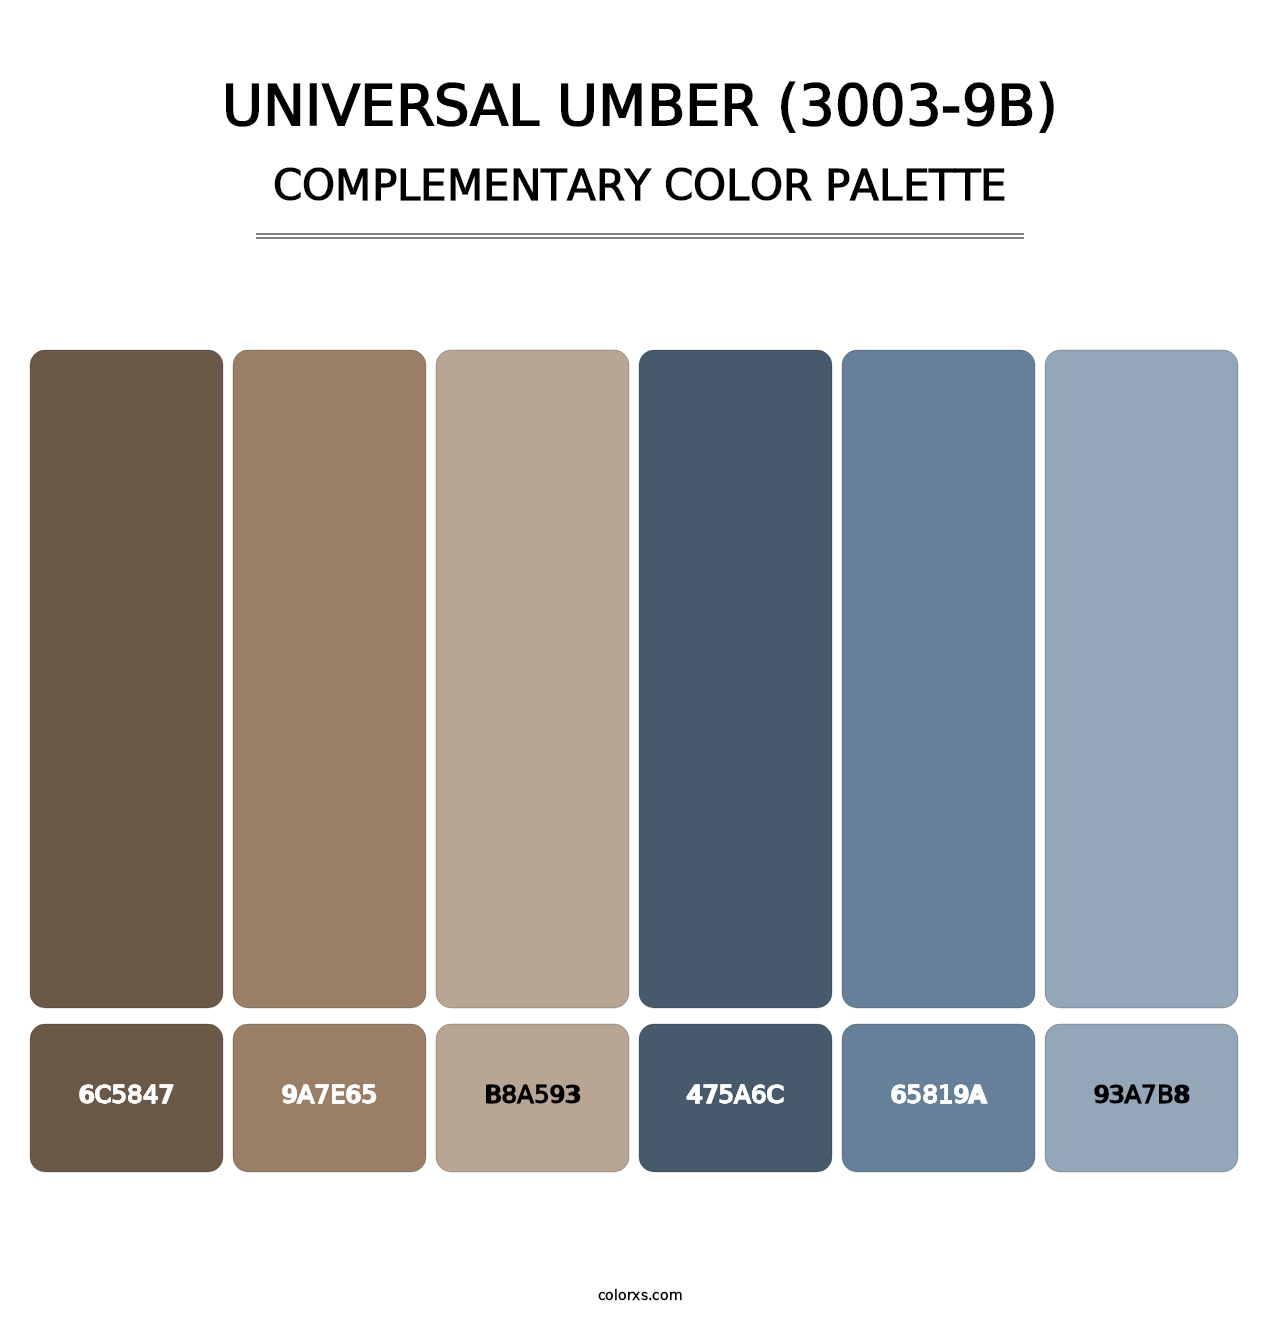 Universal Umber (3003-9B) - Complementary Color Palette